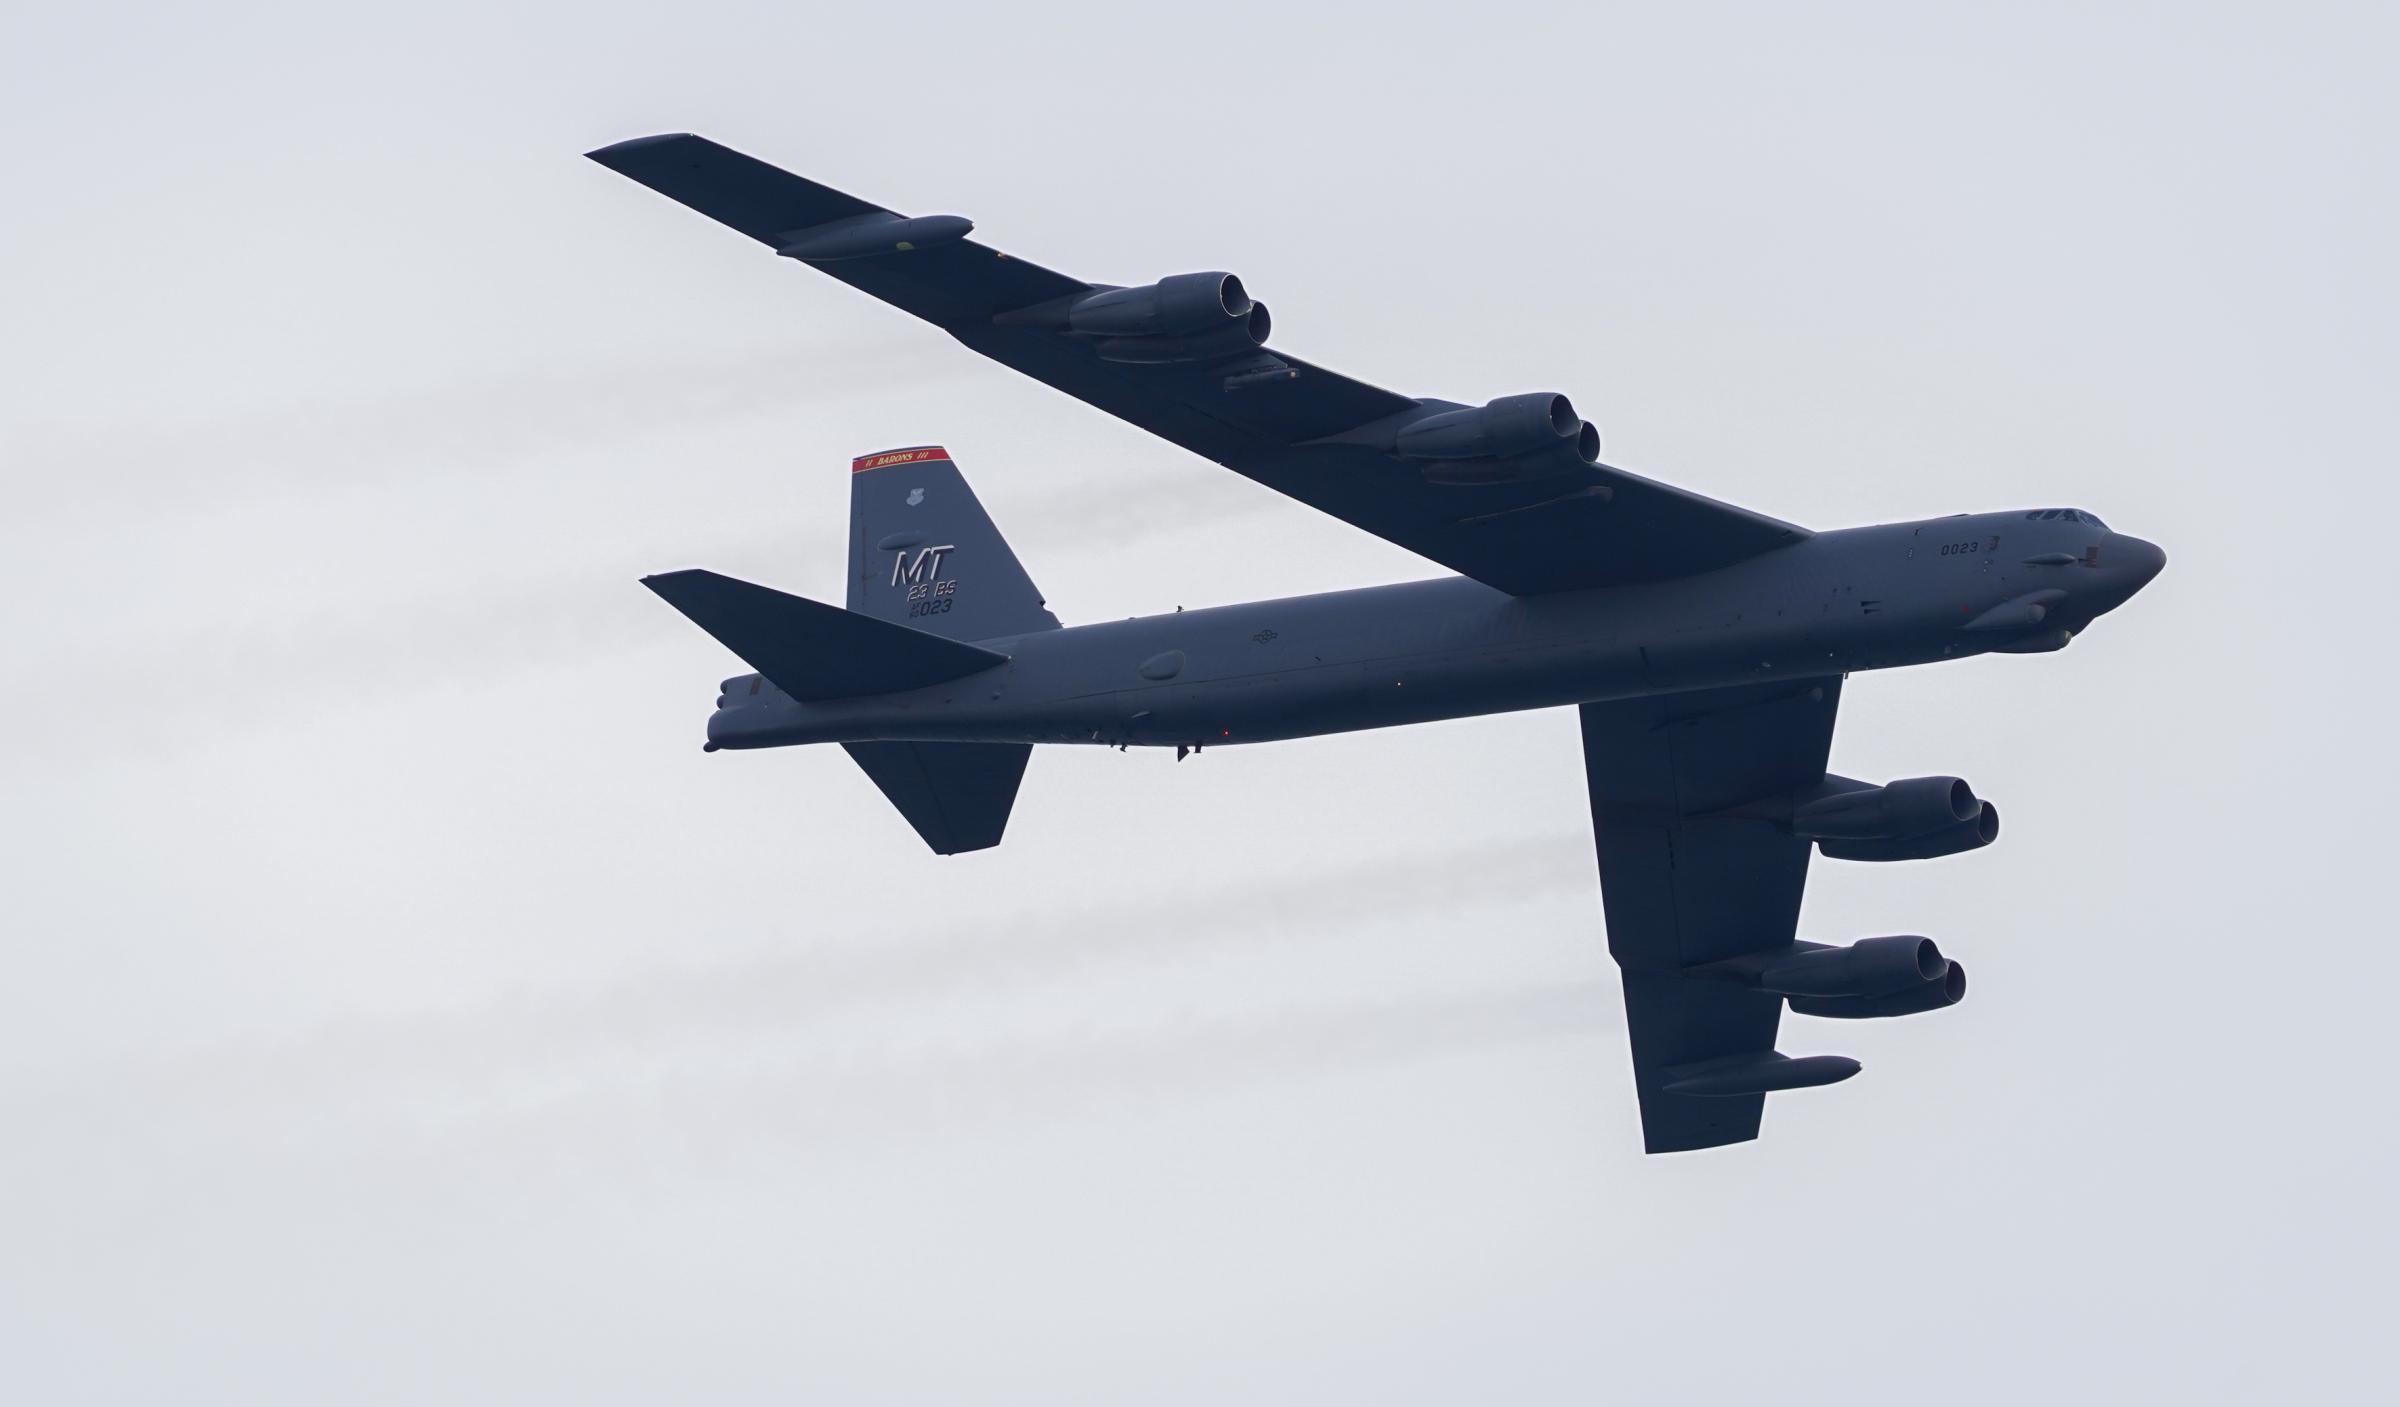 A B-52 Stratofortress, like this one pictured at Bournemouth air festival, was seen flying over Herefordshire overnight